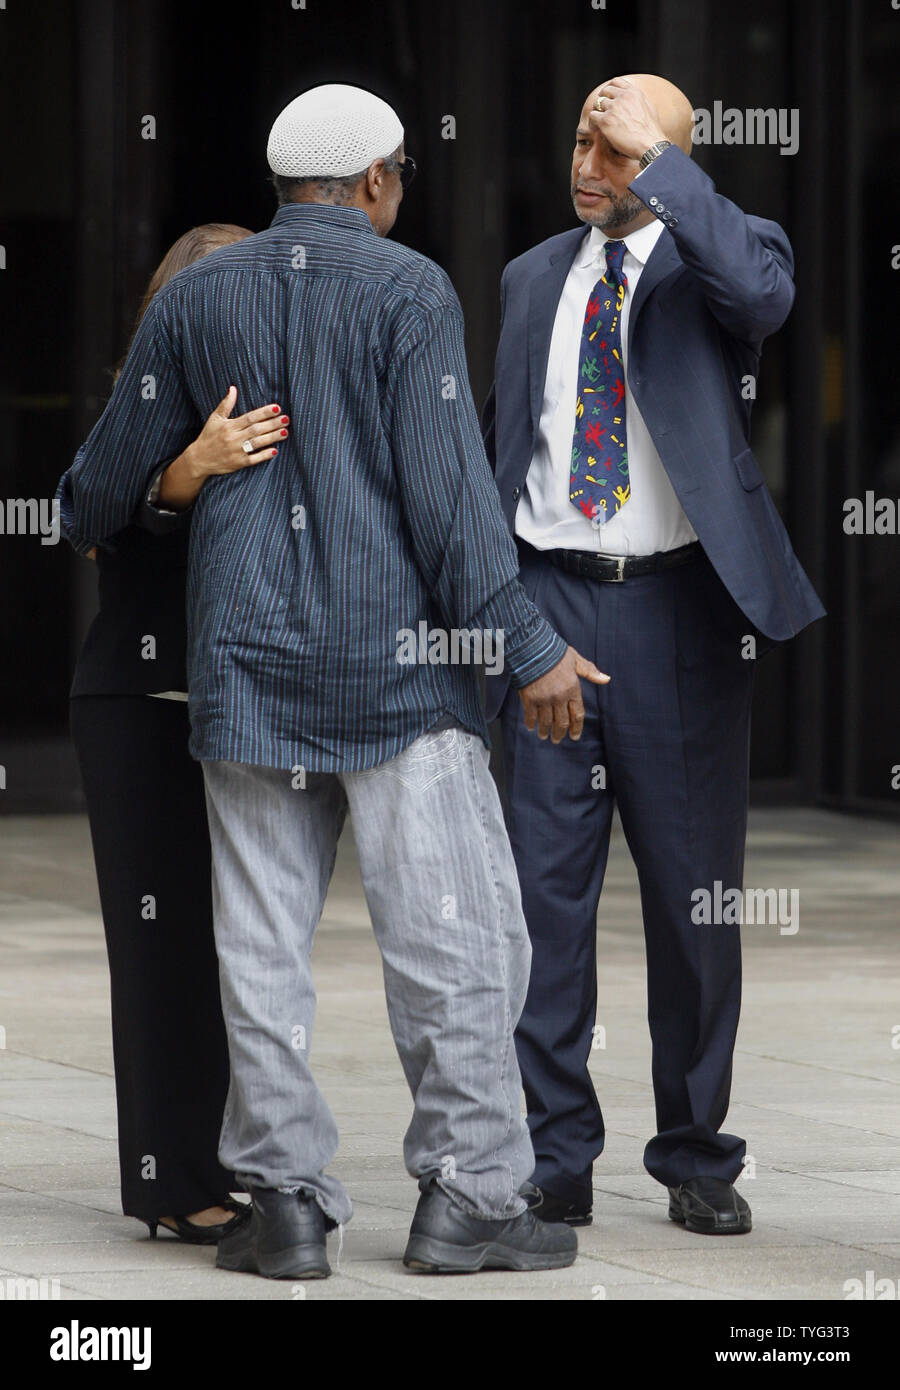 Former New Orleans mayor Ray Nagin (R) and his wife Seletha are greeted by Jerome Smith, a supporter and friend, after Nagin was sentenced to 10 years in Oakdale, Louisiana, a federal prison by U.S. District Judge Helen 'Ginger' Berrigan for fraud, bribery and related charges involving crimes that took place before and after Katrina devastated the city in August 2005. He was ordered to report to federal prison Sept. 8, and also pay restitution of $82,000.  UPI/A.J. Sisco Stock Photo